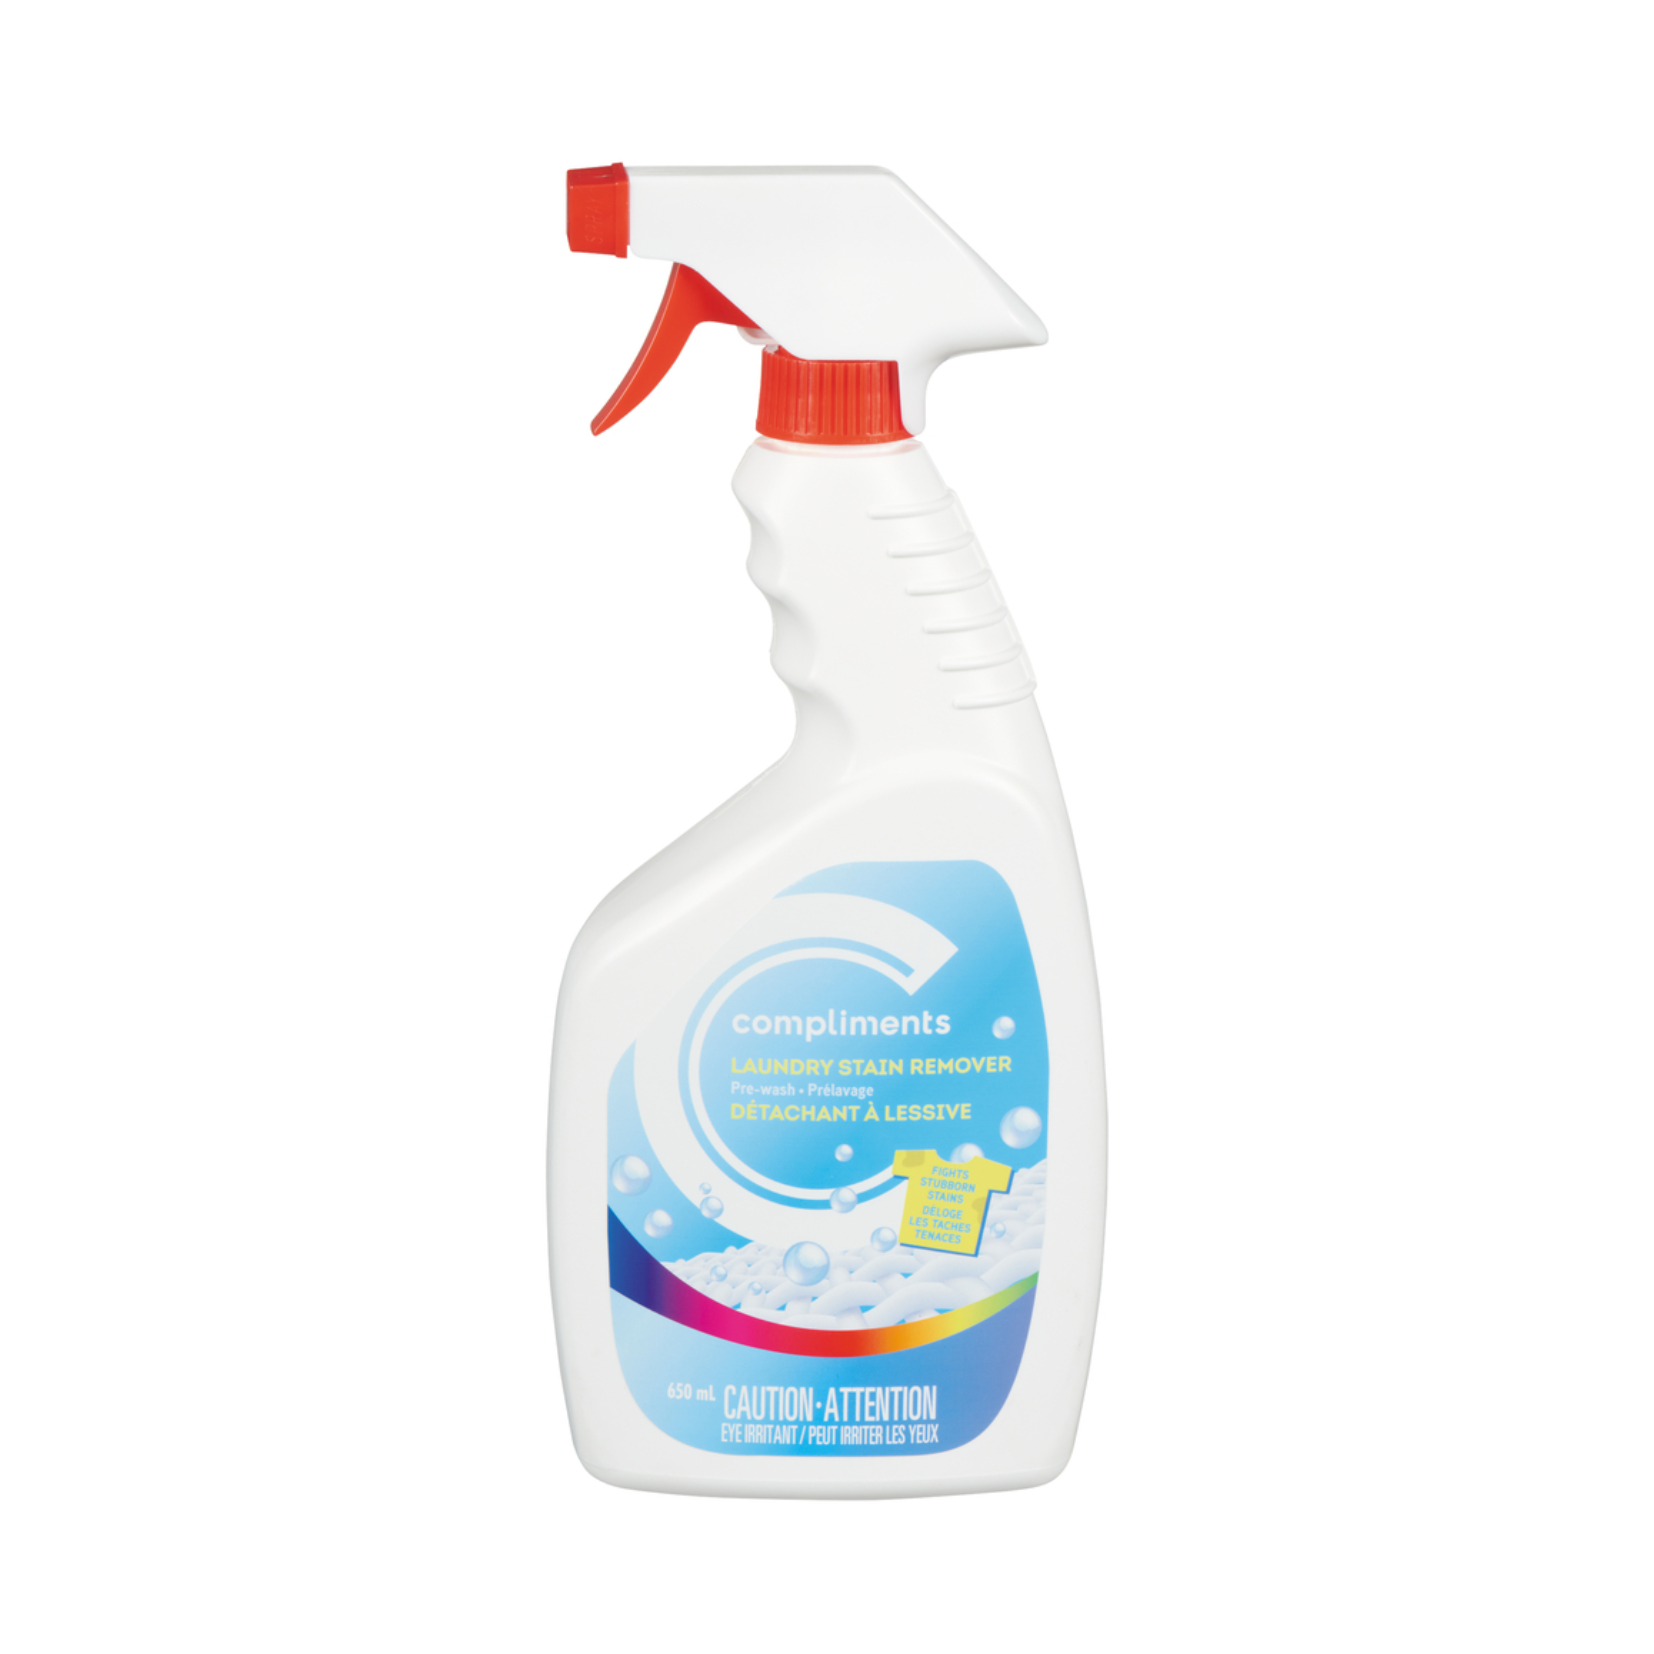 Compliments Laundry Stain Remover 650ml